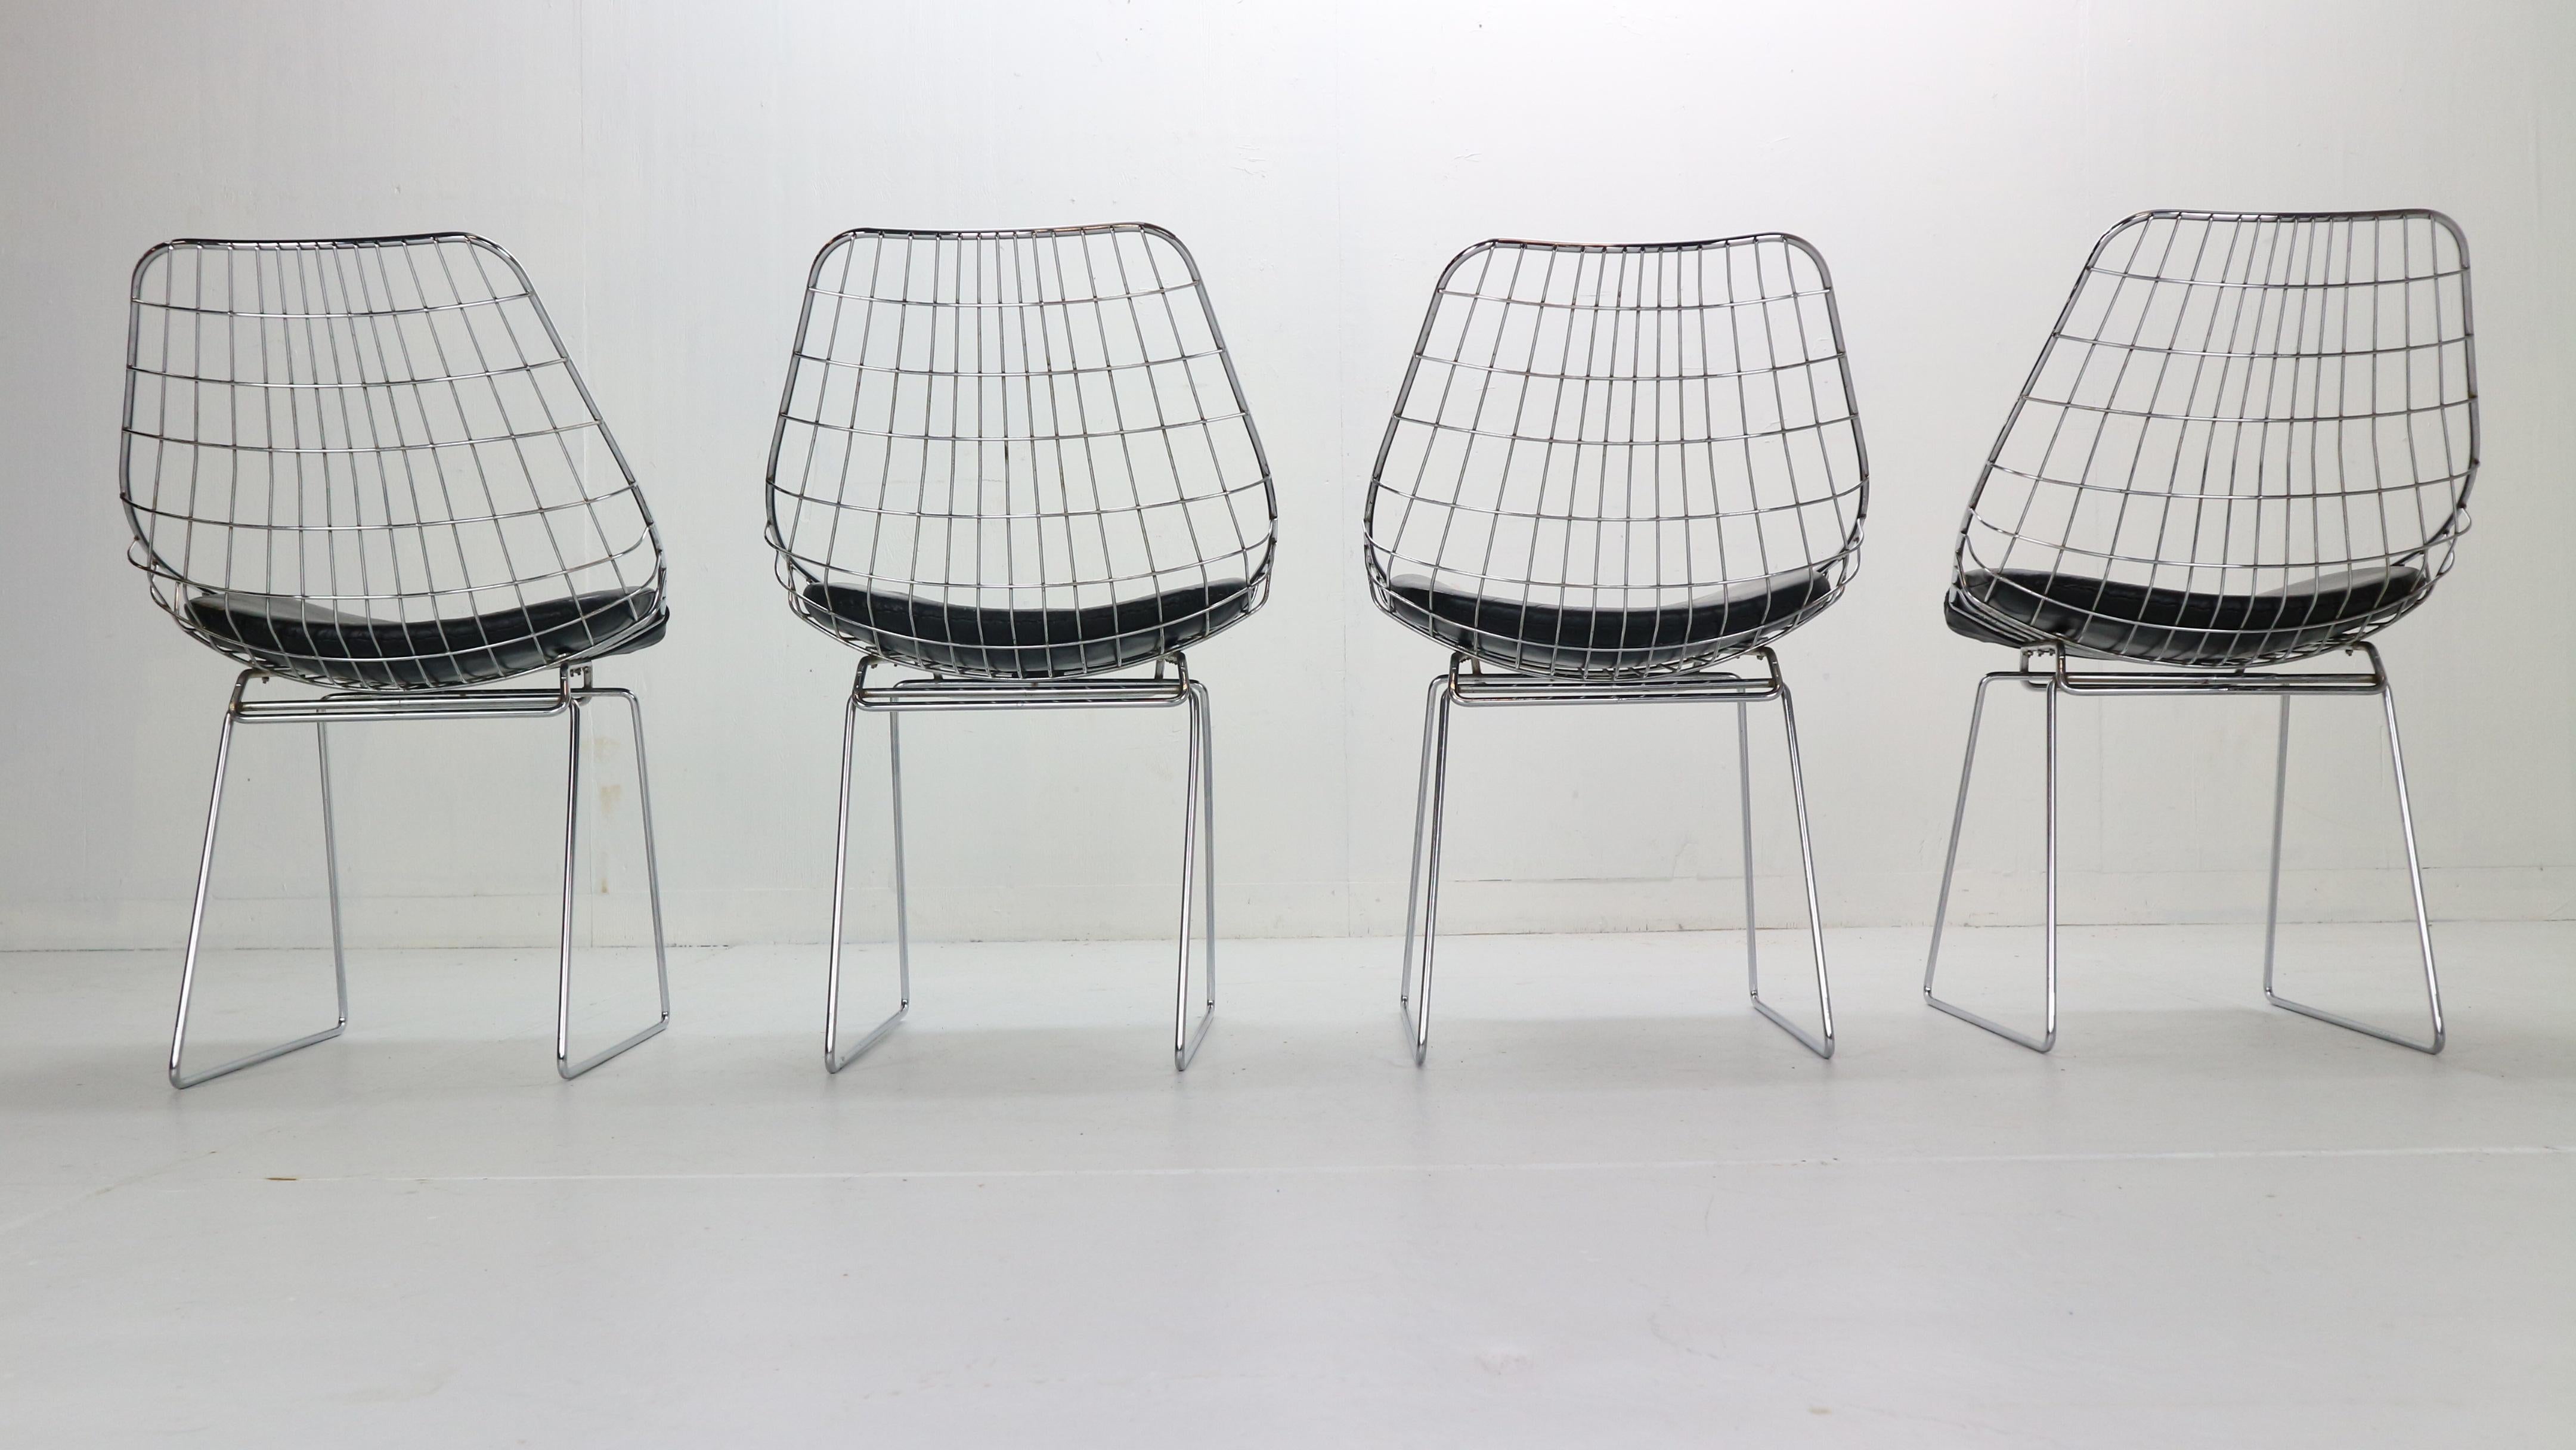 Mid-20th Century Cees Braakman Set of 4 Wire Chairs Model, 'SM05' for Pastoe, 1950s